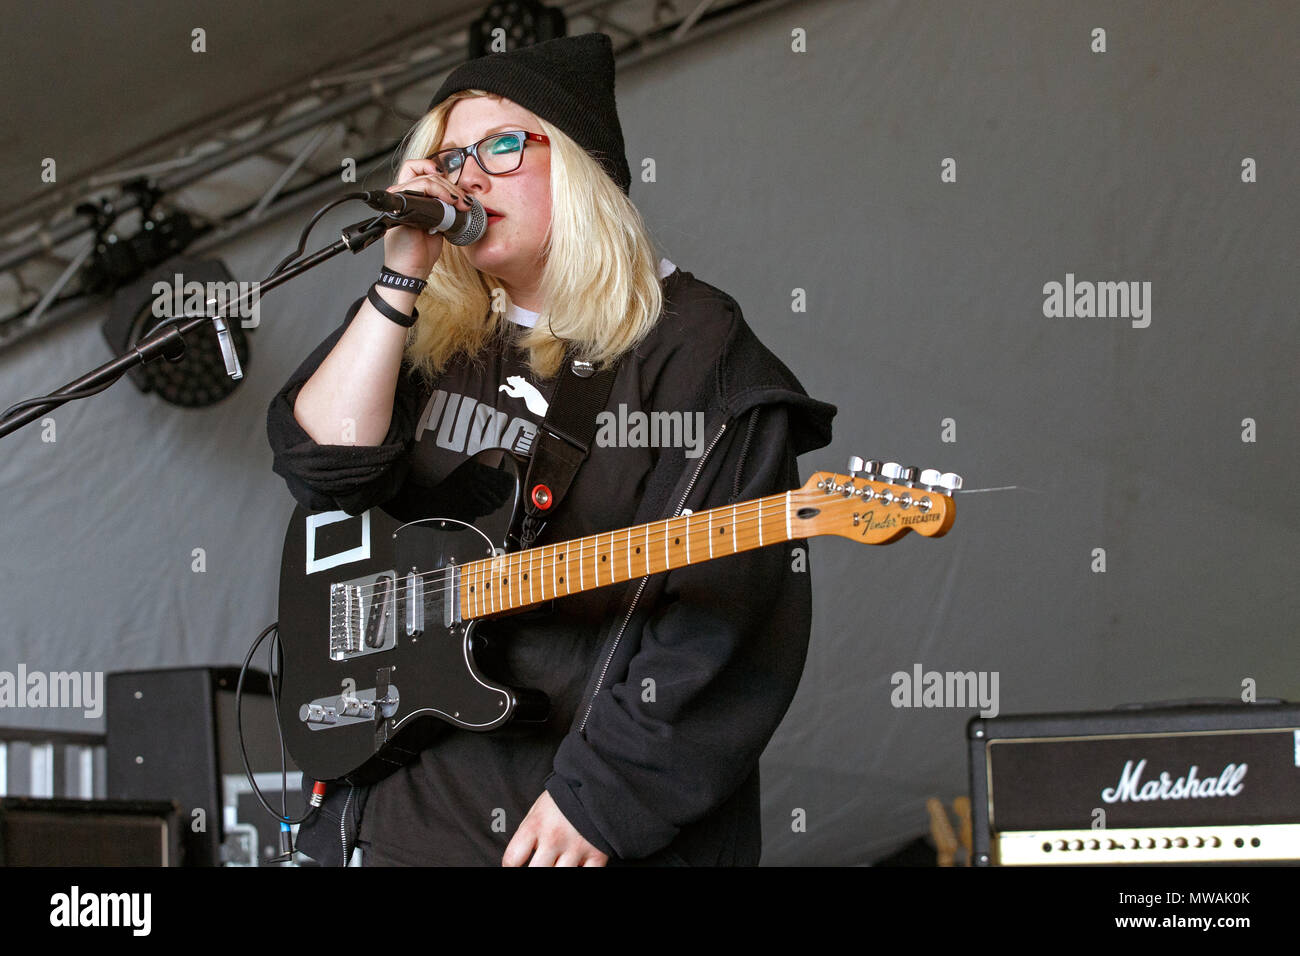 Alie Cotter of Skies performing live at 110 Above Festival in 2016. Skies band, Skies singer, Alie Cotter onstage. Stock Photo